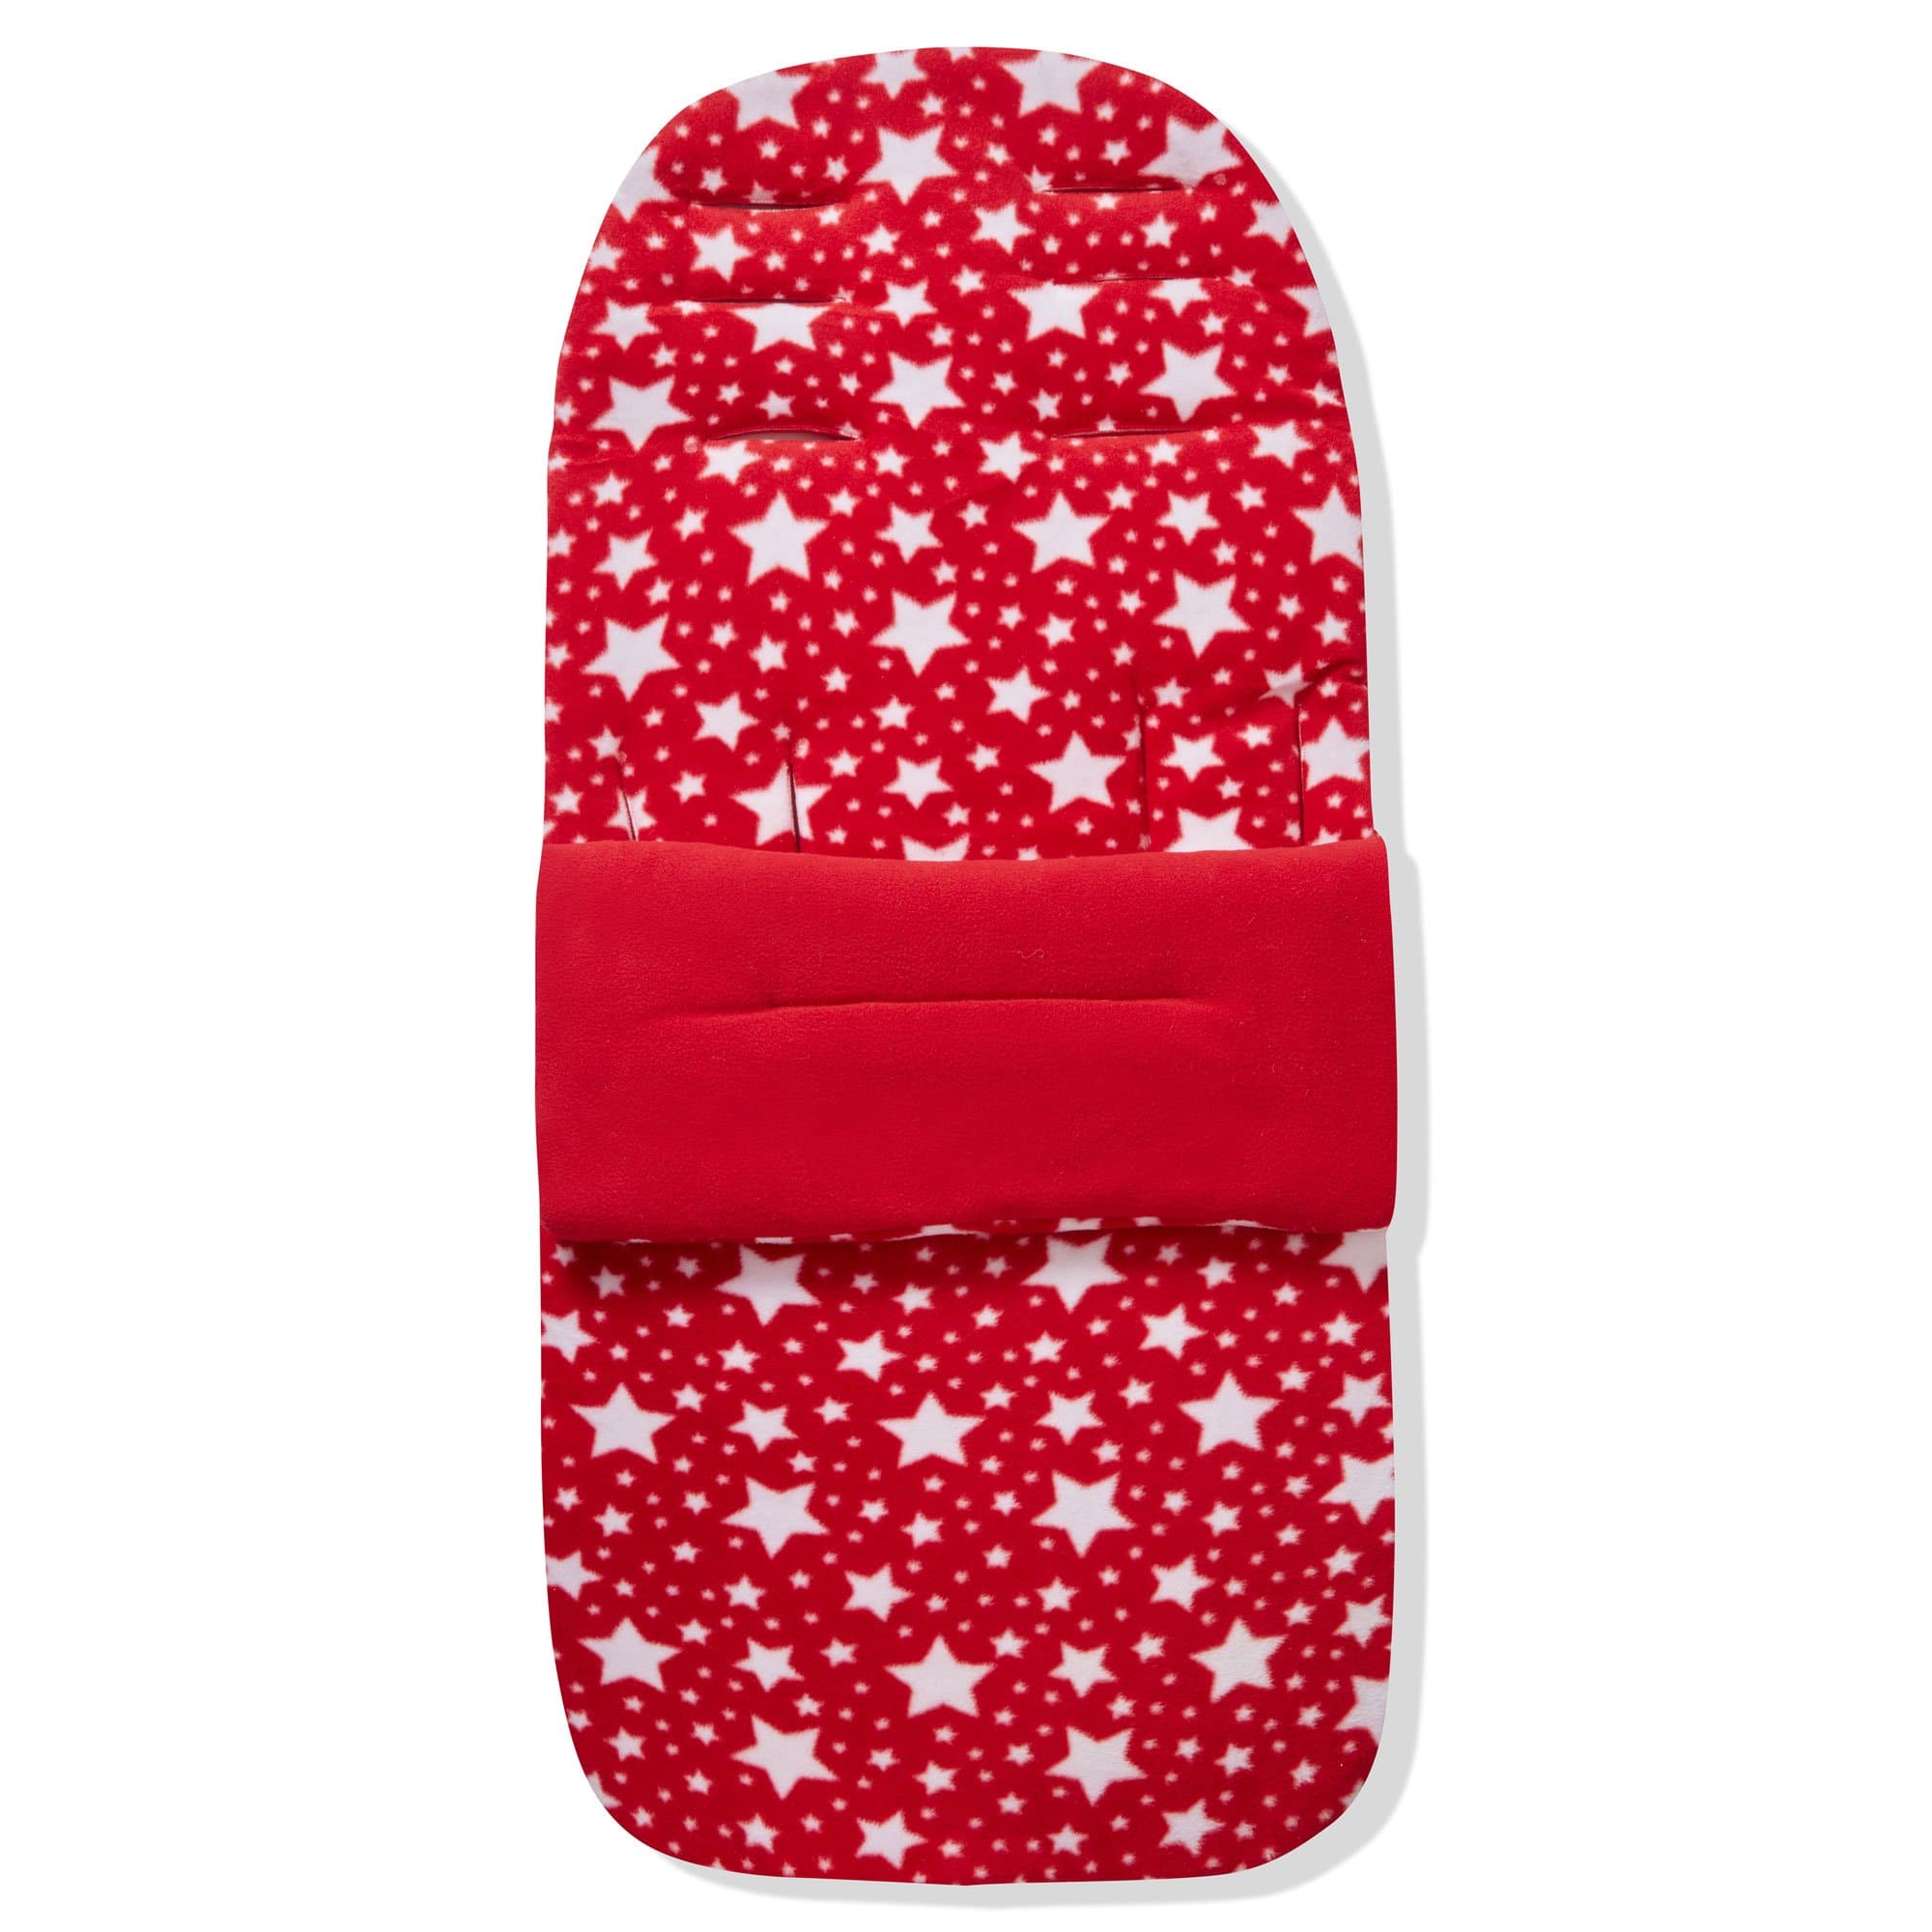 Fleece Footmuff / Cosy Toes Compatible with Maxi Cosi - Red Star / Fits All Models | For Your Little One